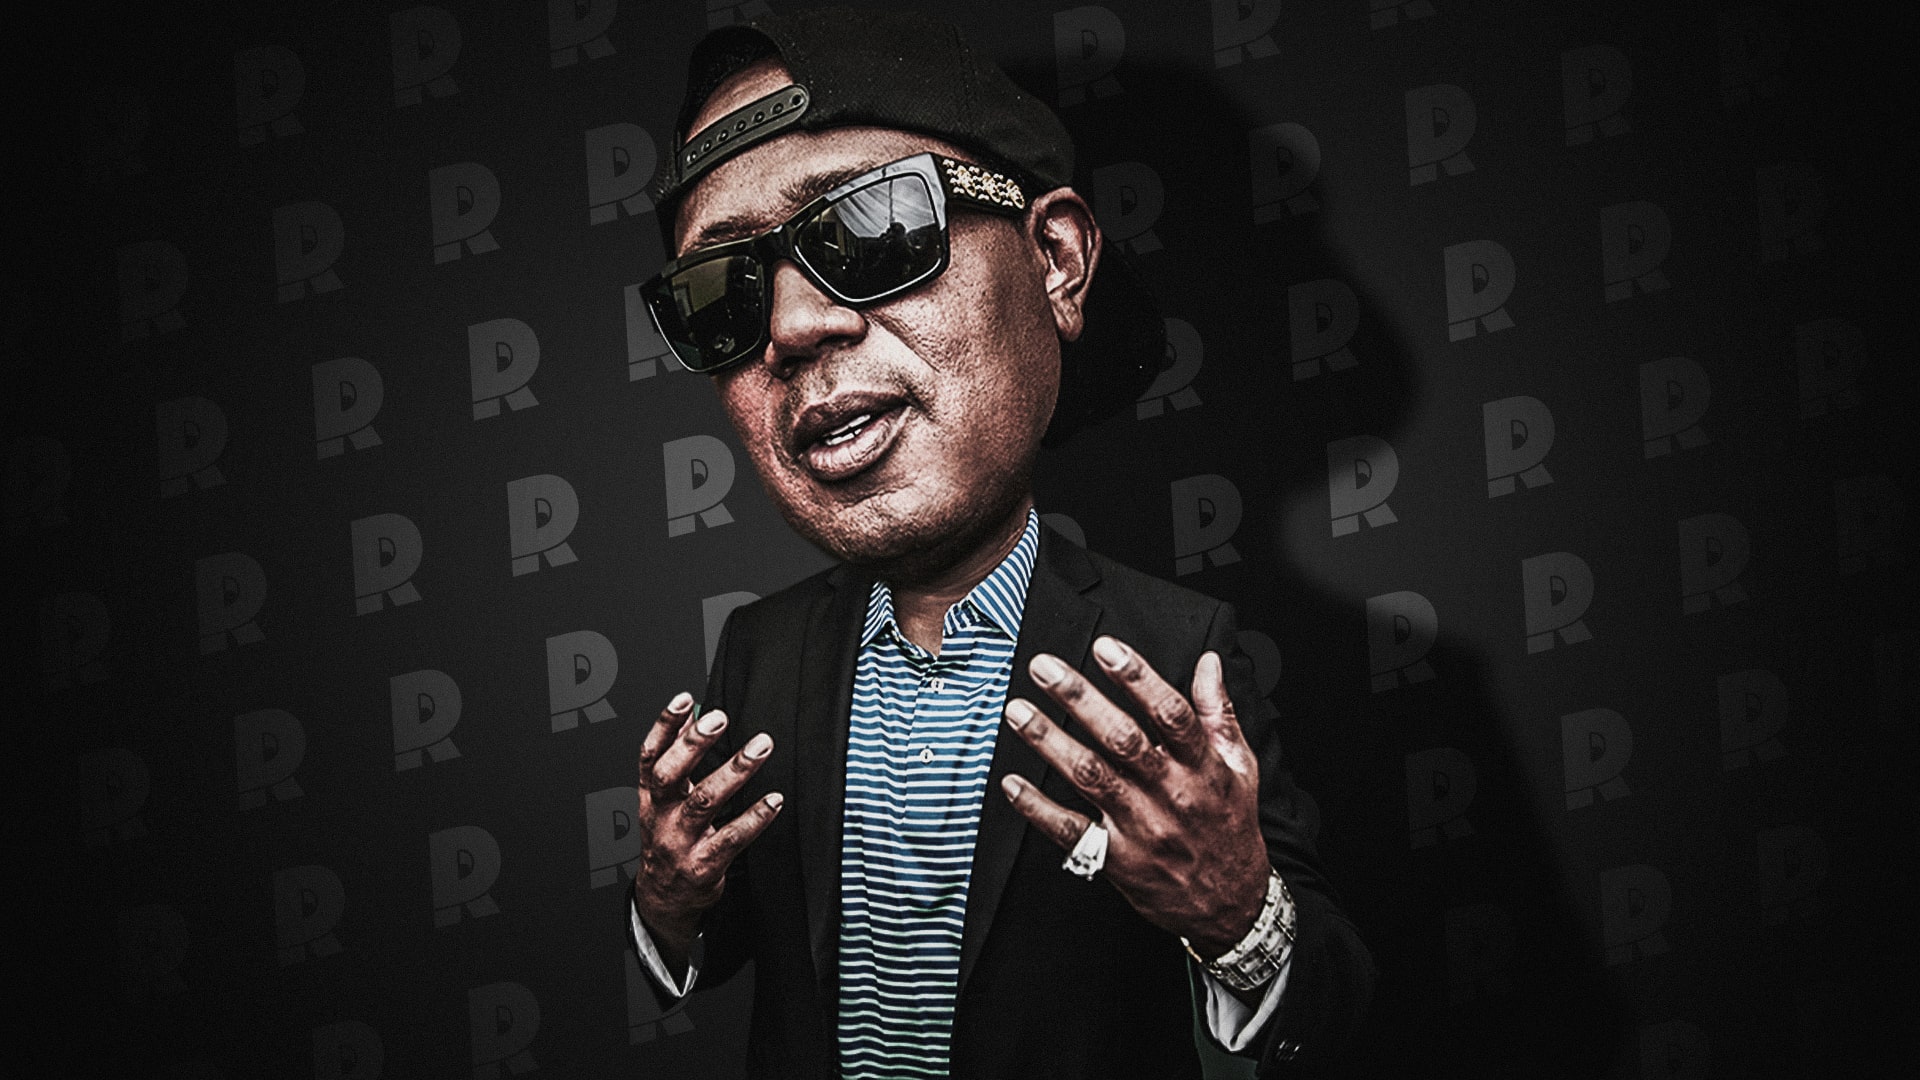 Master P Net worth $200 Million - Who Is the Richest Hip Hop Artist in the World of 2022?